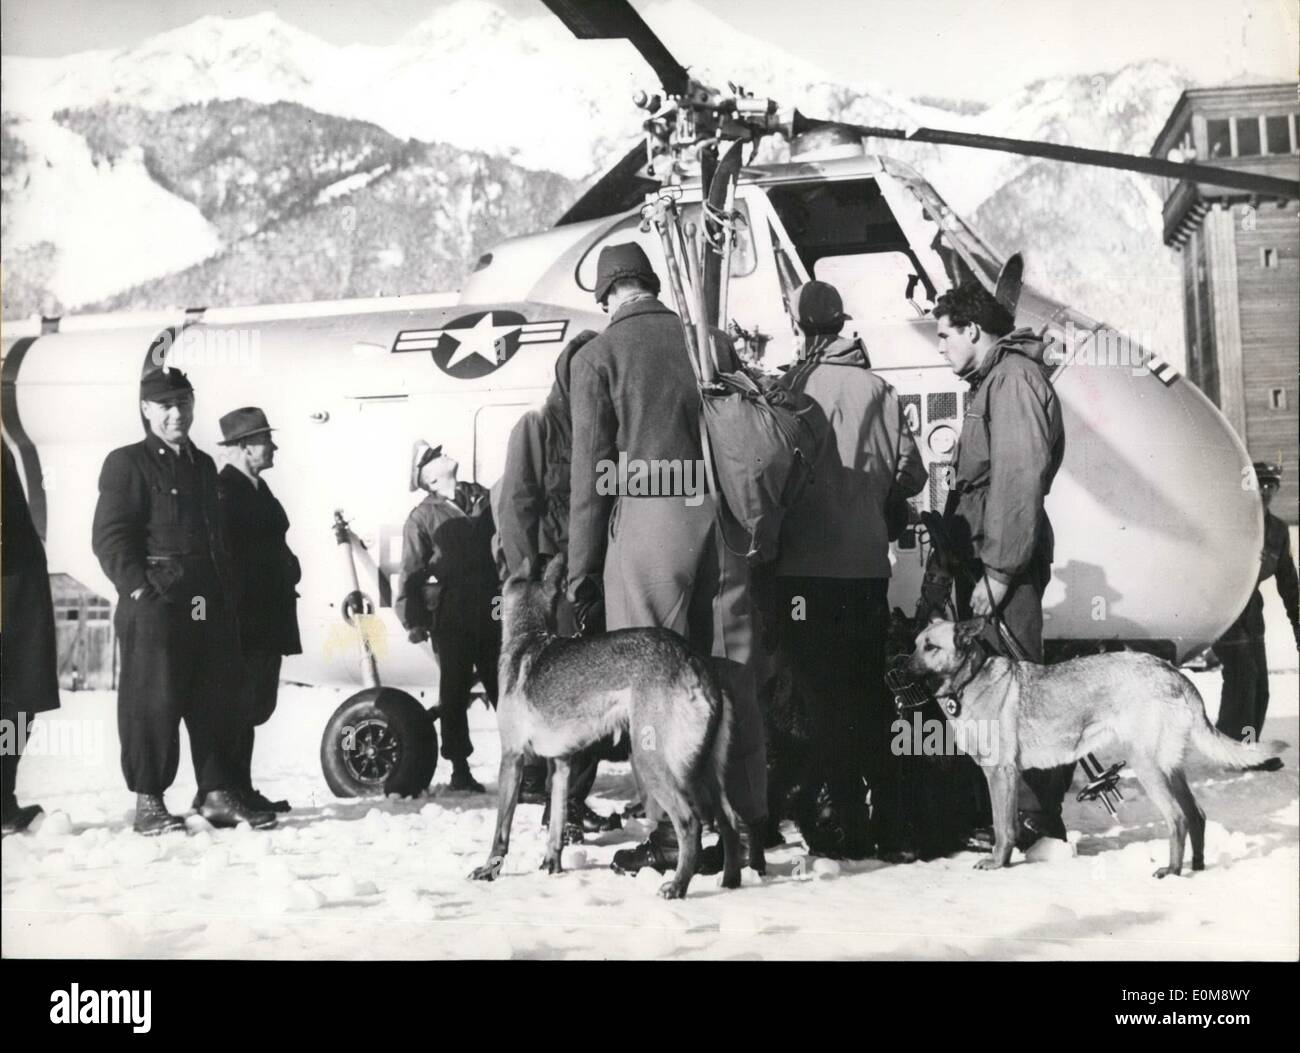 Jan. 01, 1954 - American army- helicopter save avalanches victims.: American army-helicopters from Munich-Furstenfeldbruck started to help saving the victims of the avalanche catastrophe in the great Walser-valley in Austria. In Innsbruck the helicopters took avalanche-dogs and well informed alpinists with them before they flew to the catastrophe districts. Stock Photo